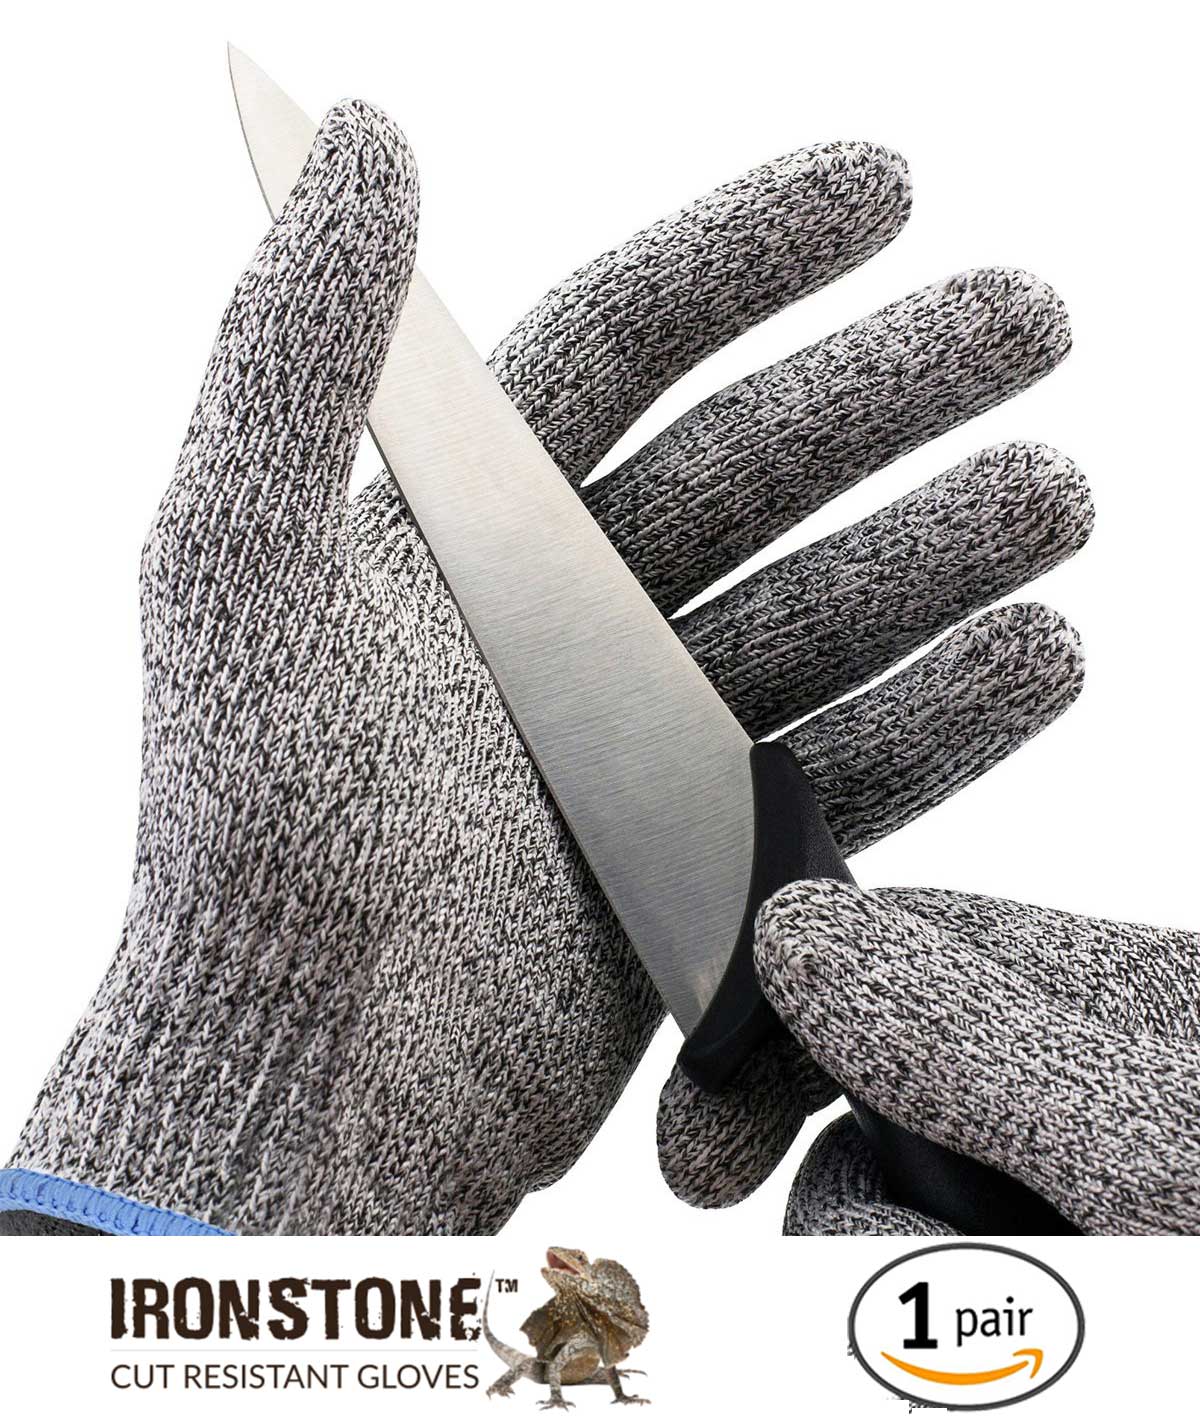 Ironstone Level 5 Cut Resistant Gloves